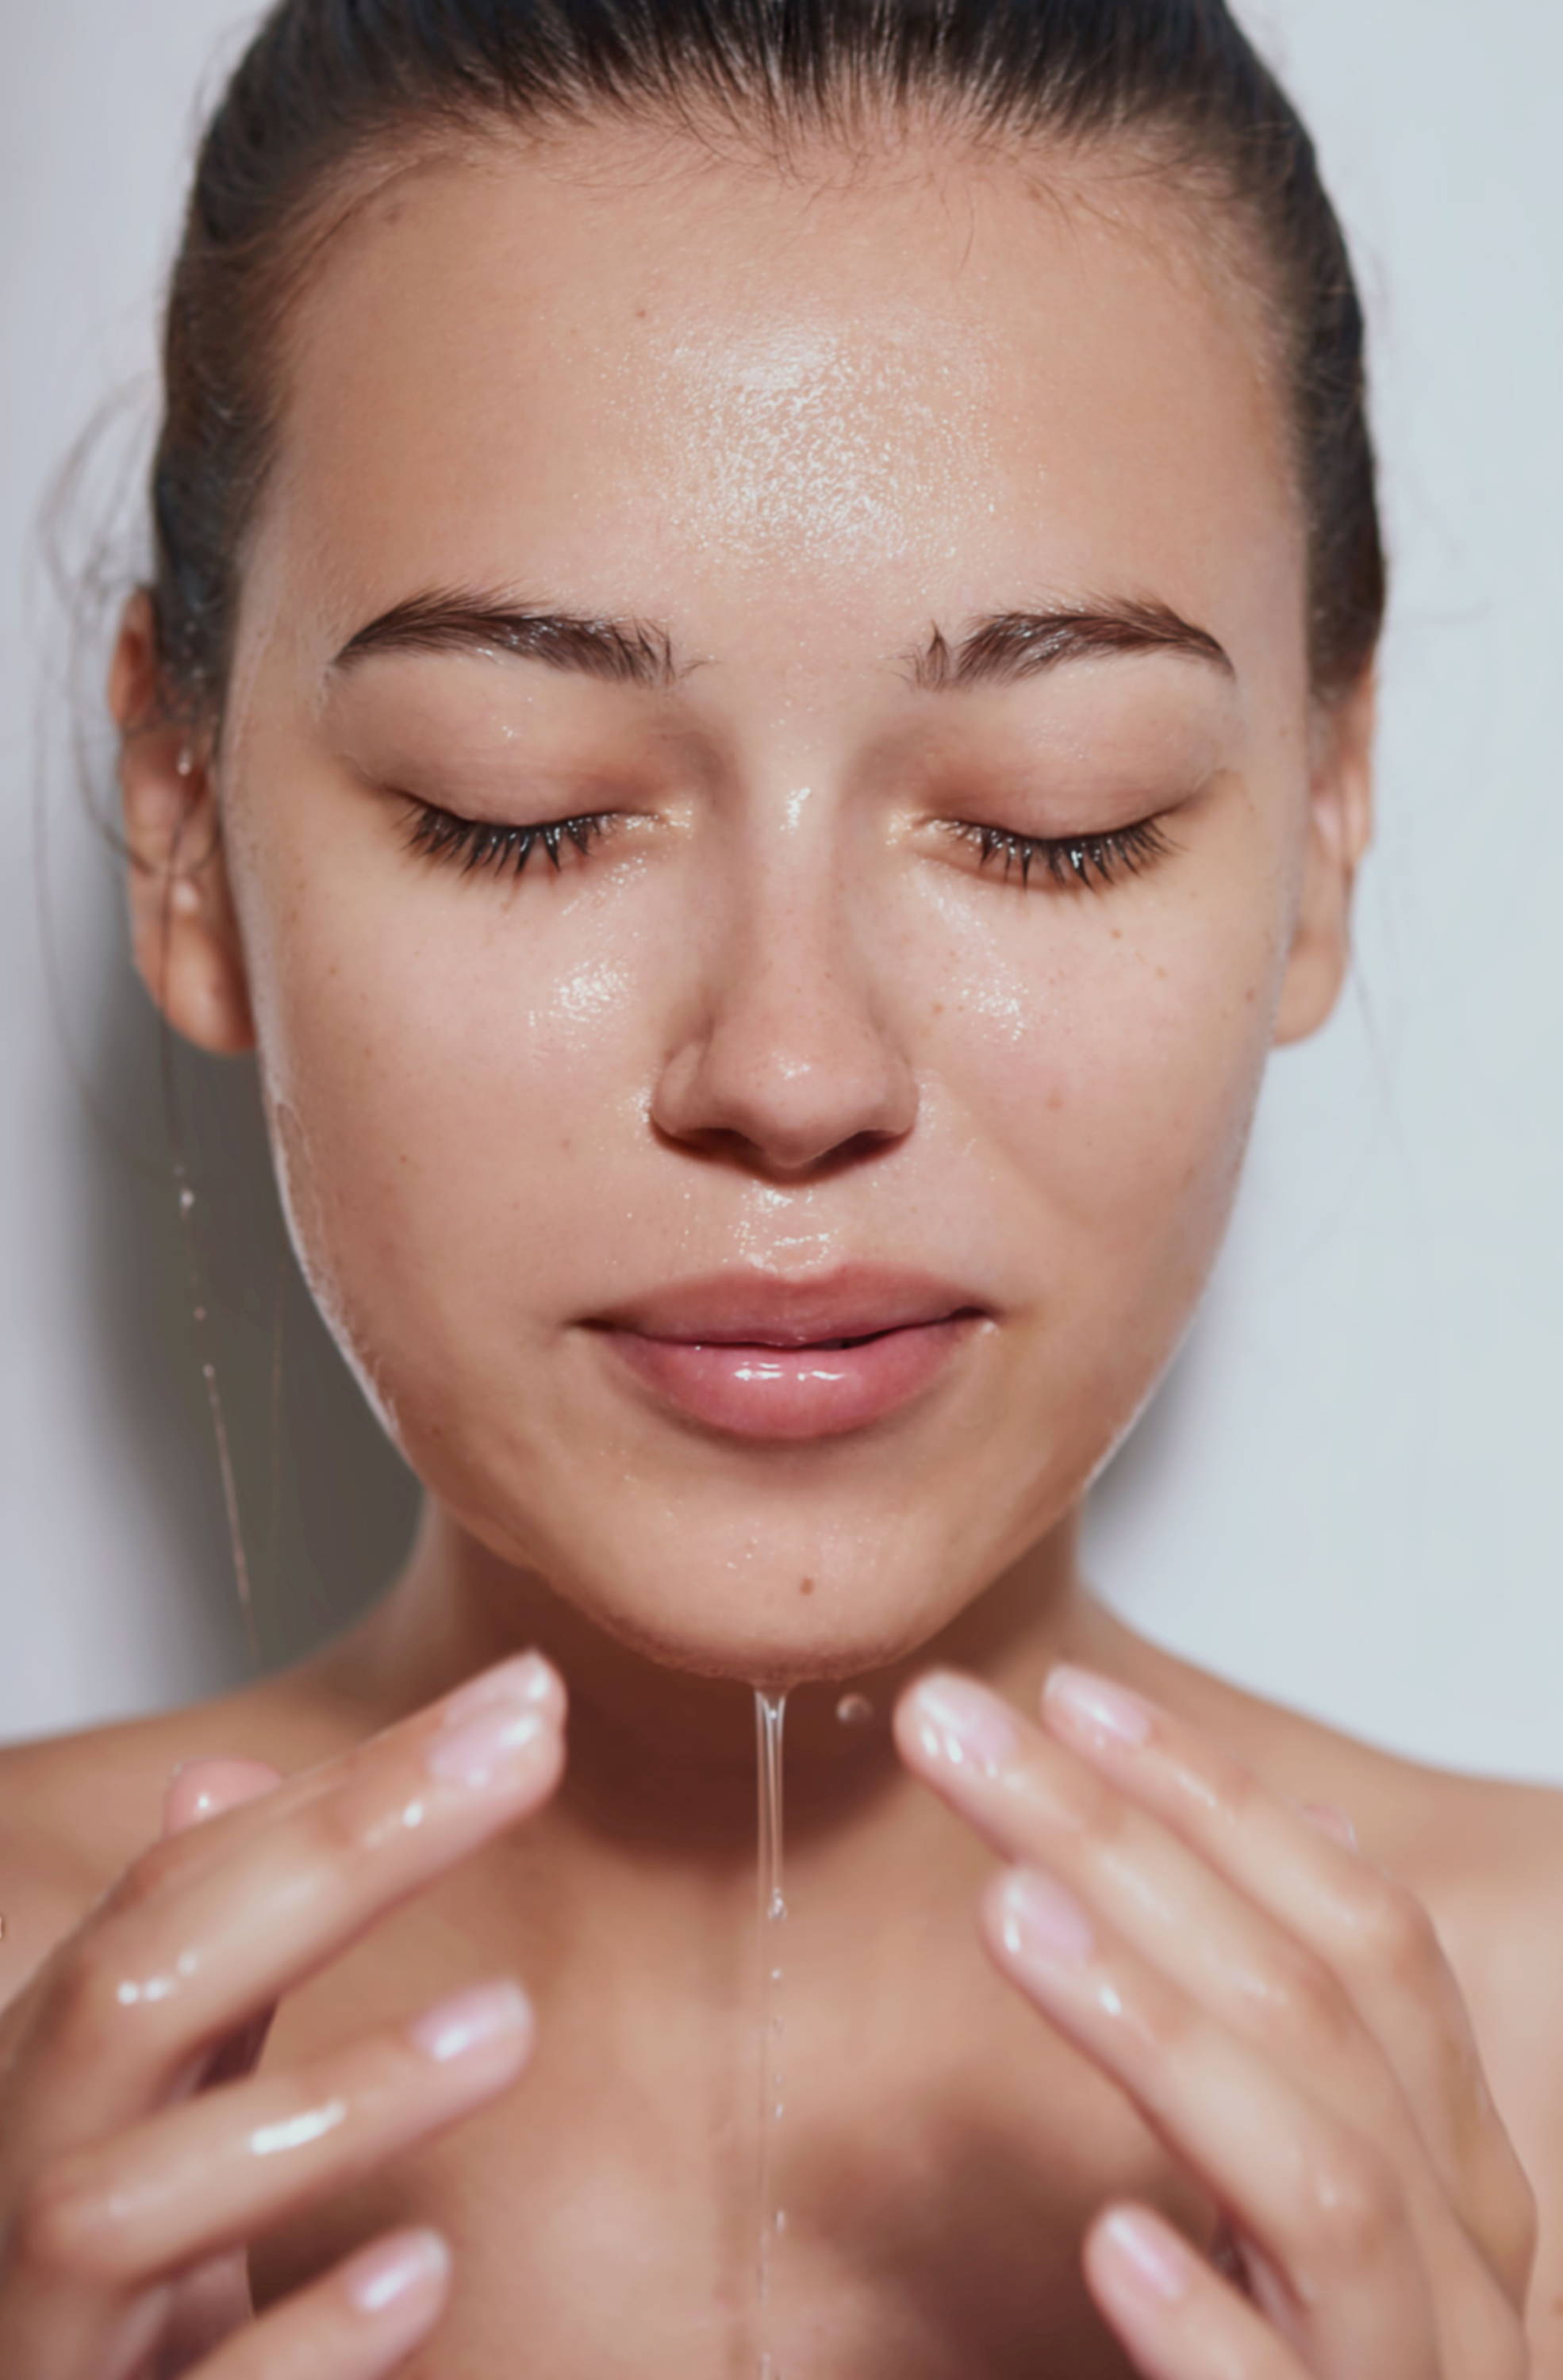 Woman rinsing her face